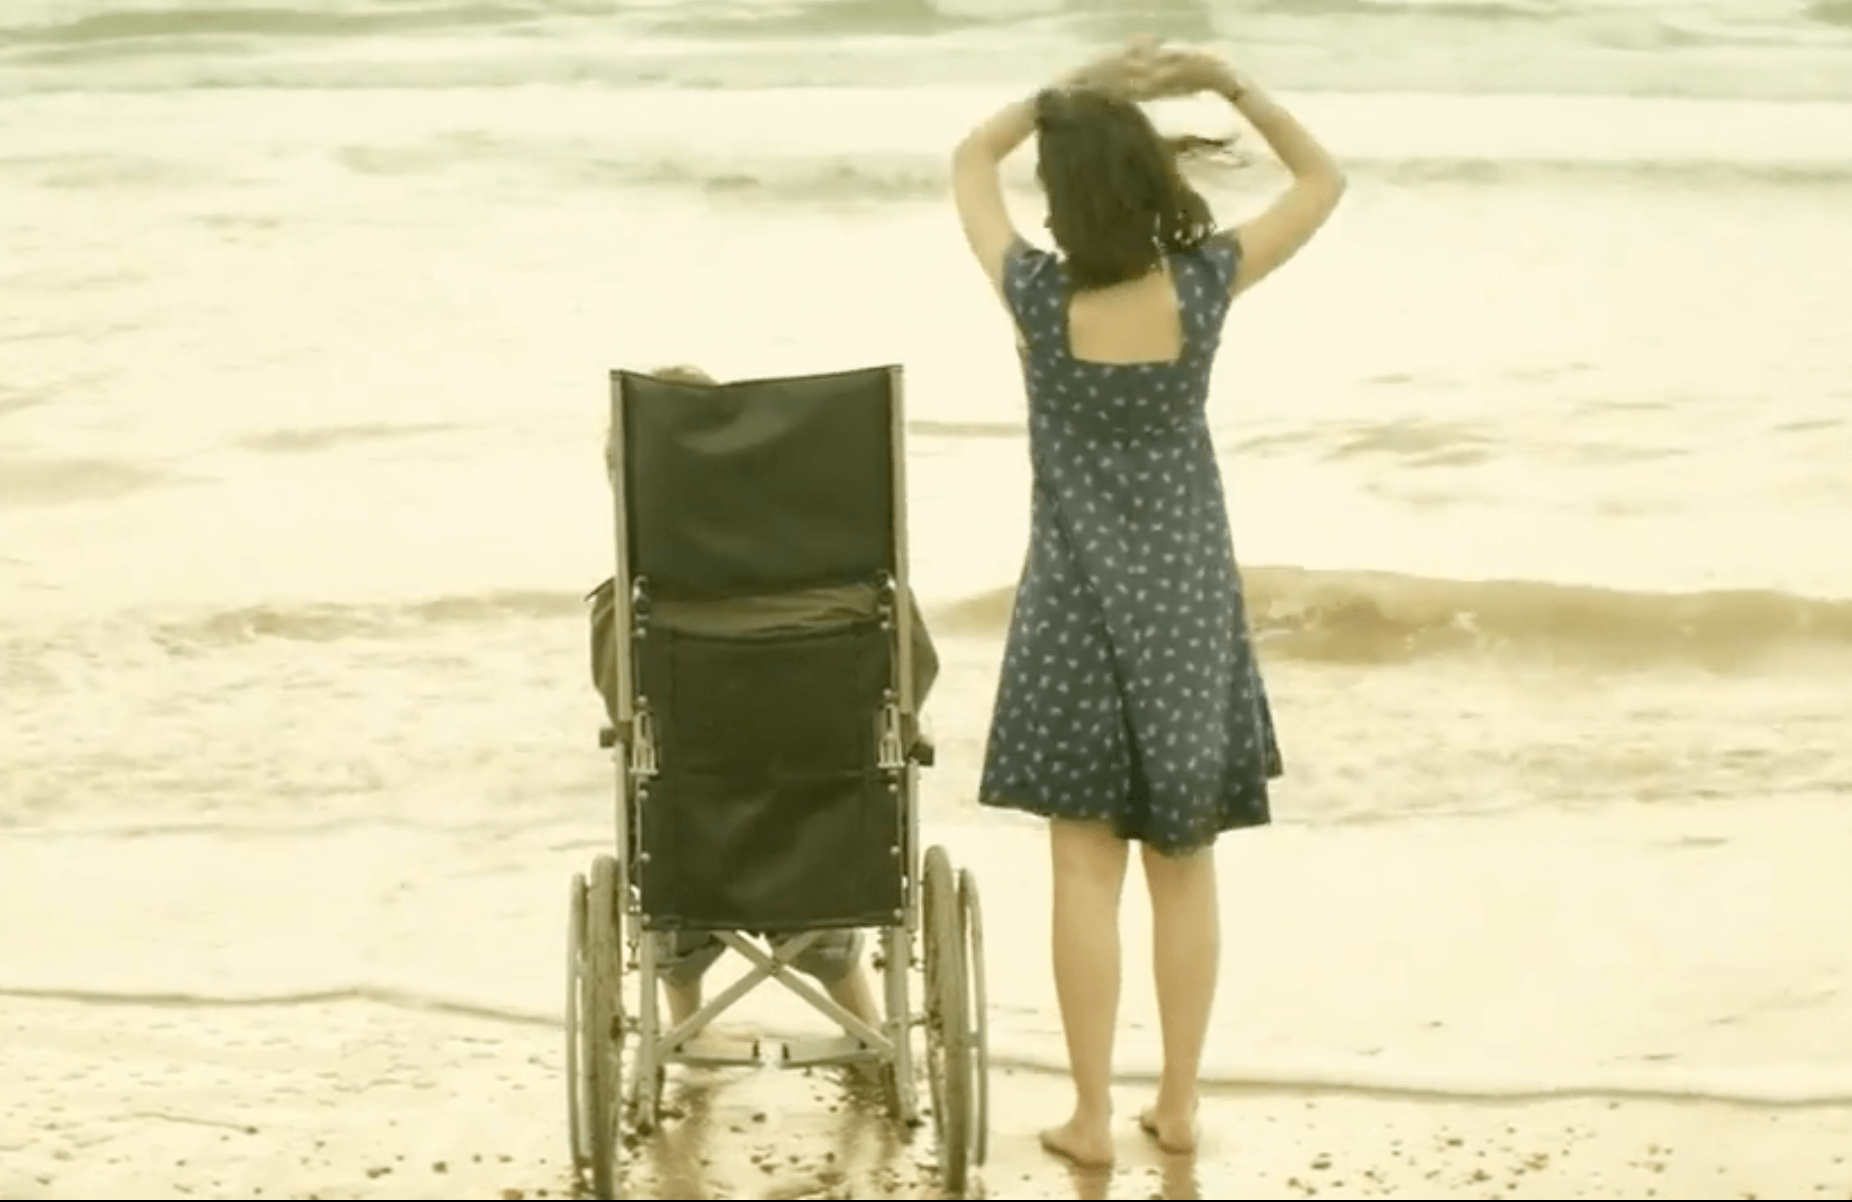 The Theory of Everything filmed at Camber Sands